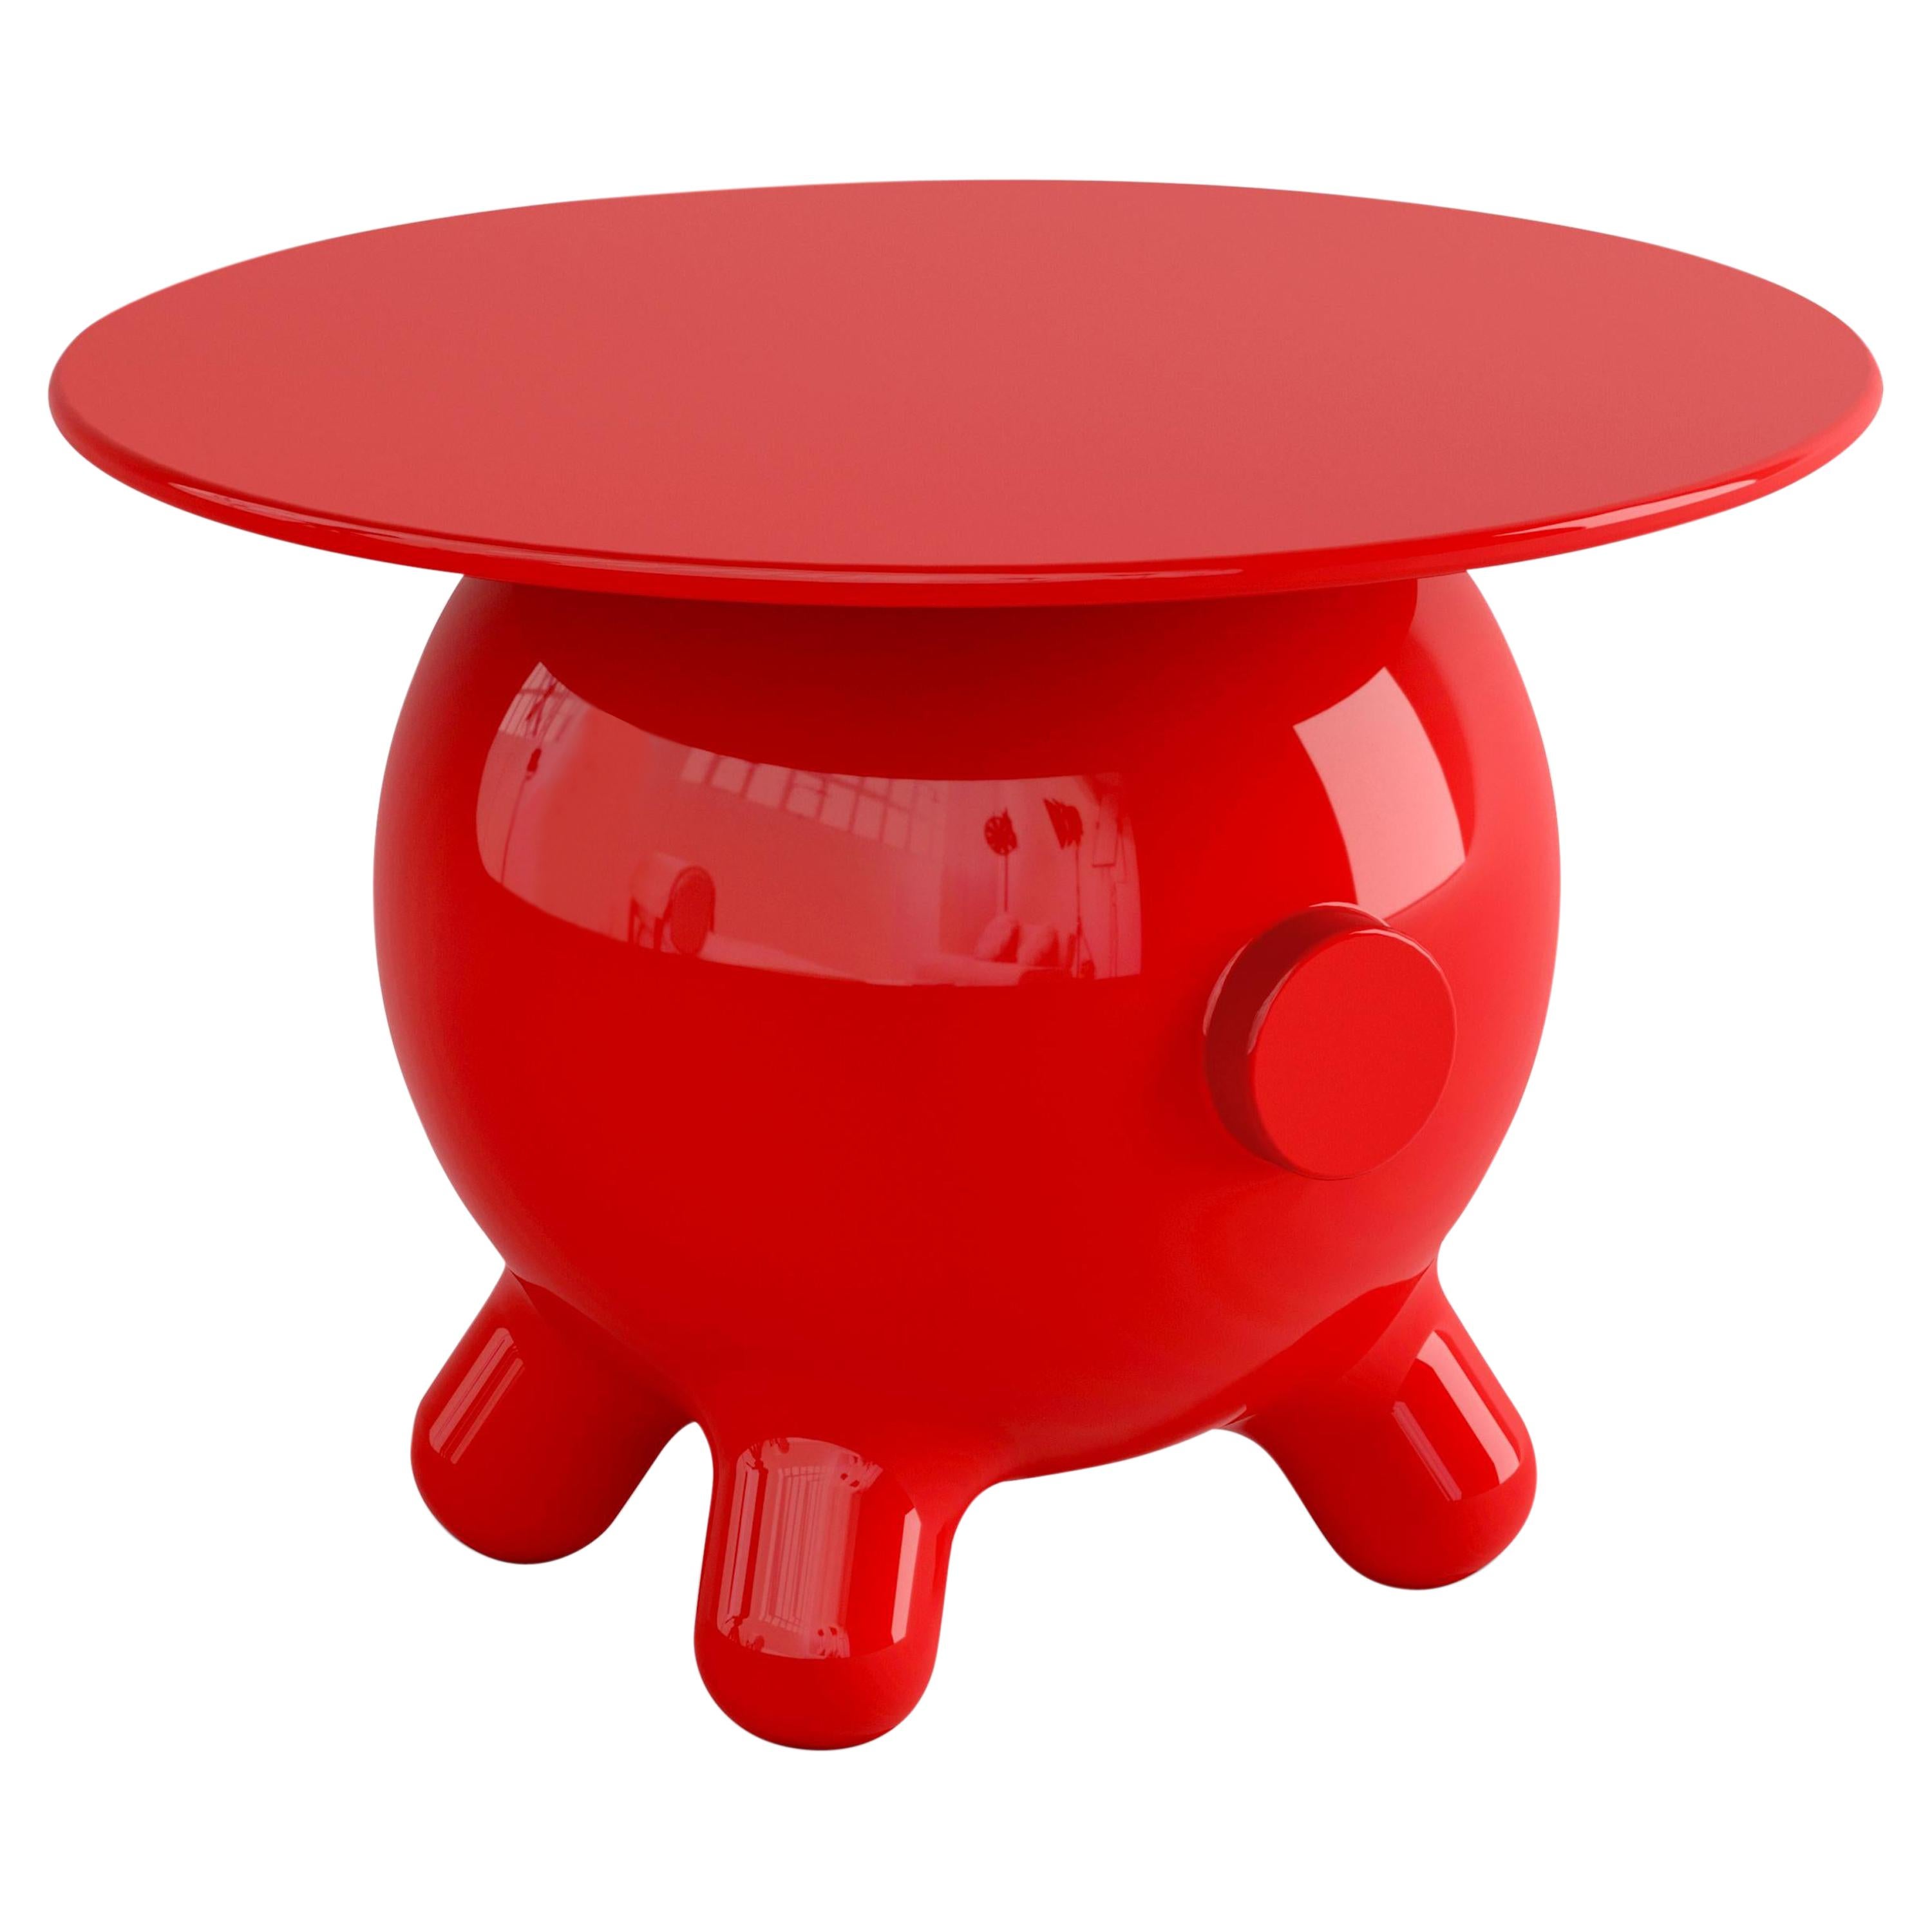 Pogo, Decorative Side Table, Nightstand, in Red by Joel Escalona im Angebot